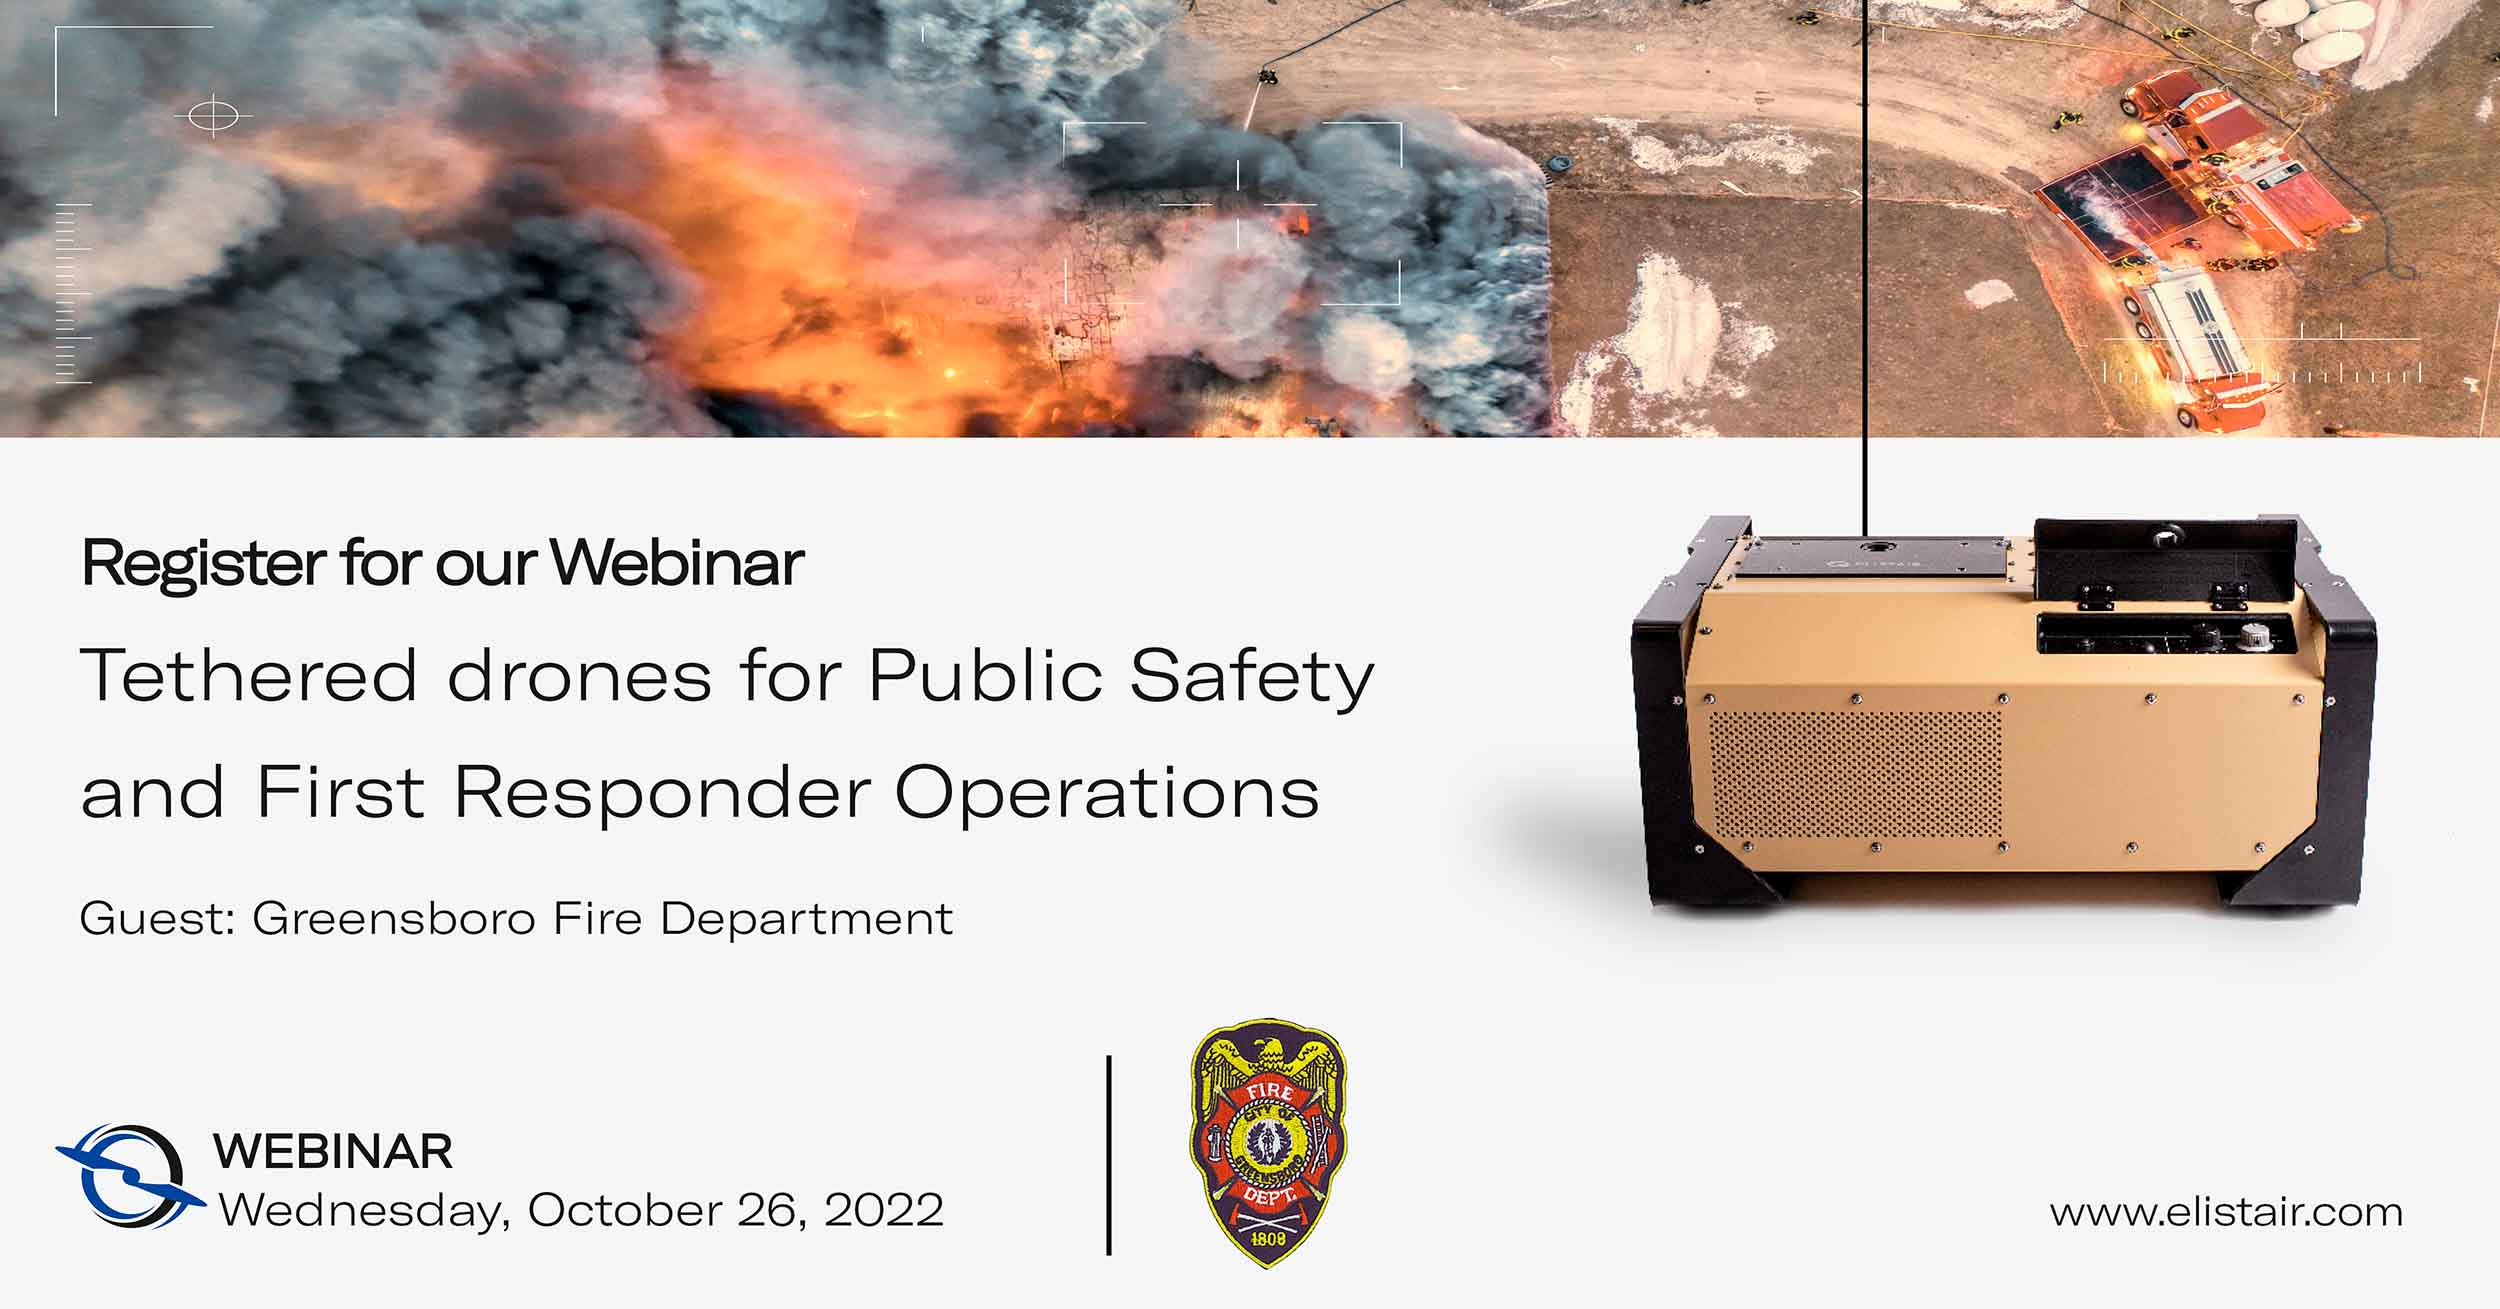 webinar about the use of drone tethers for public safety operations